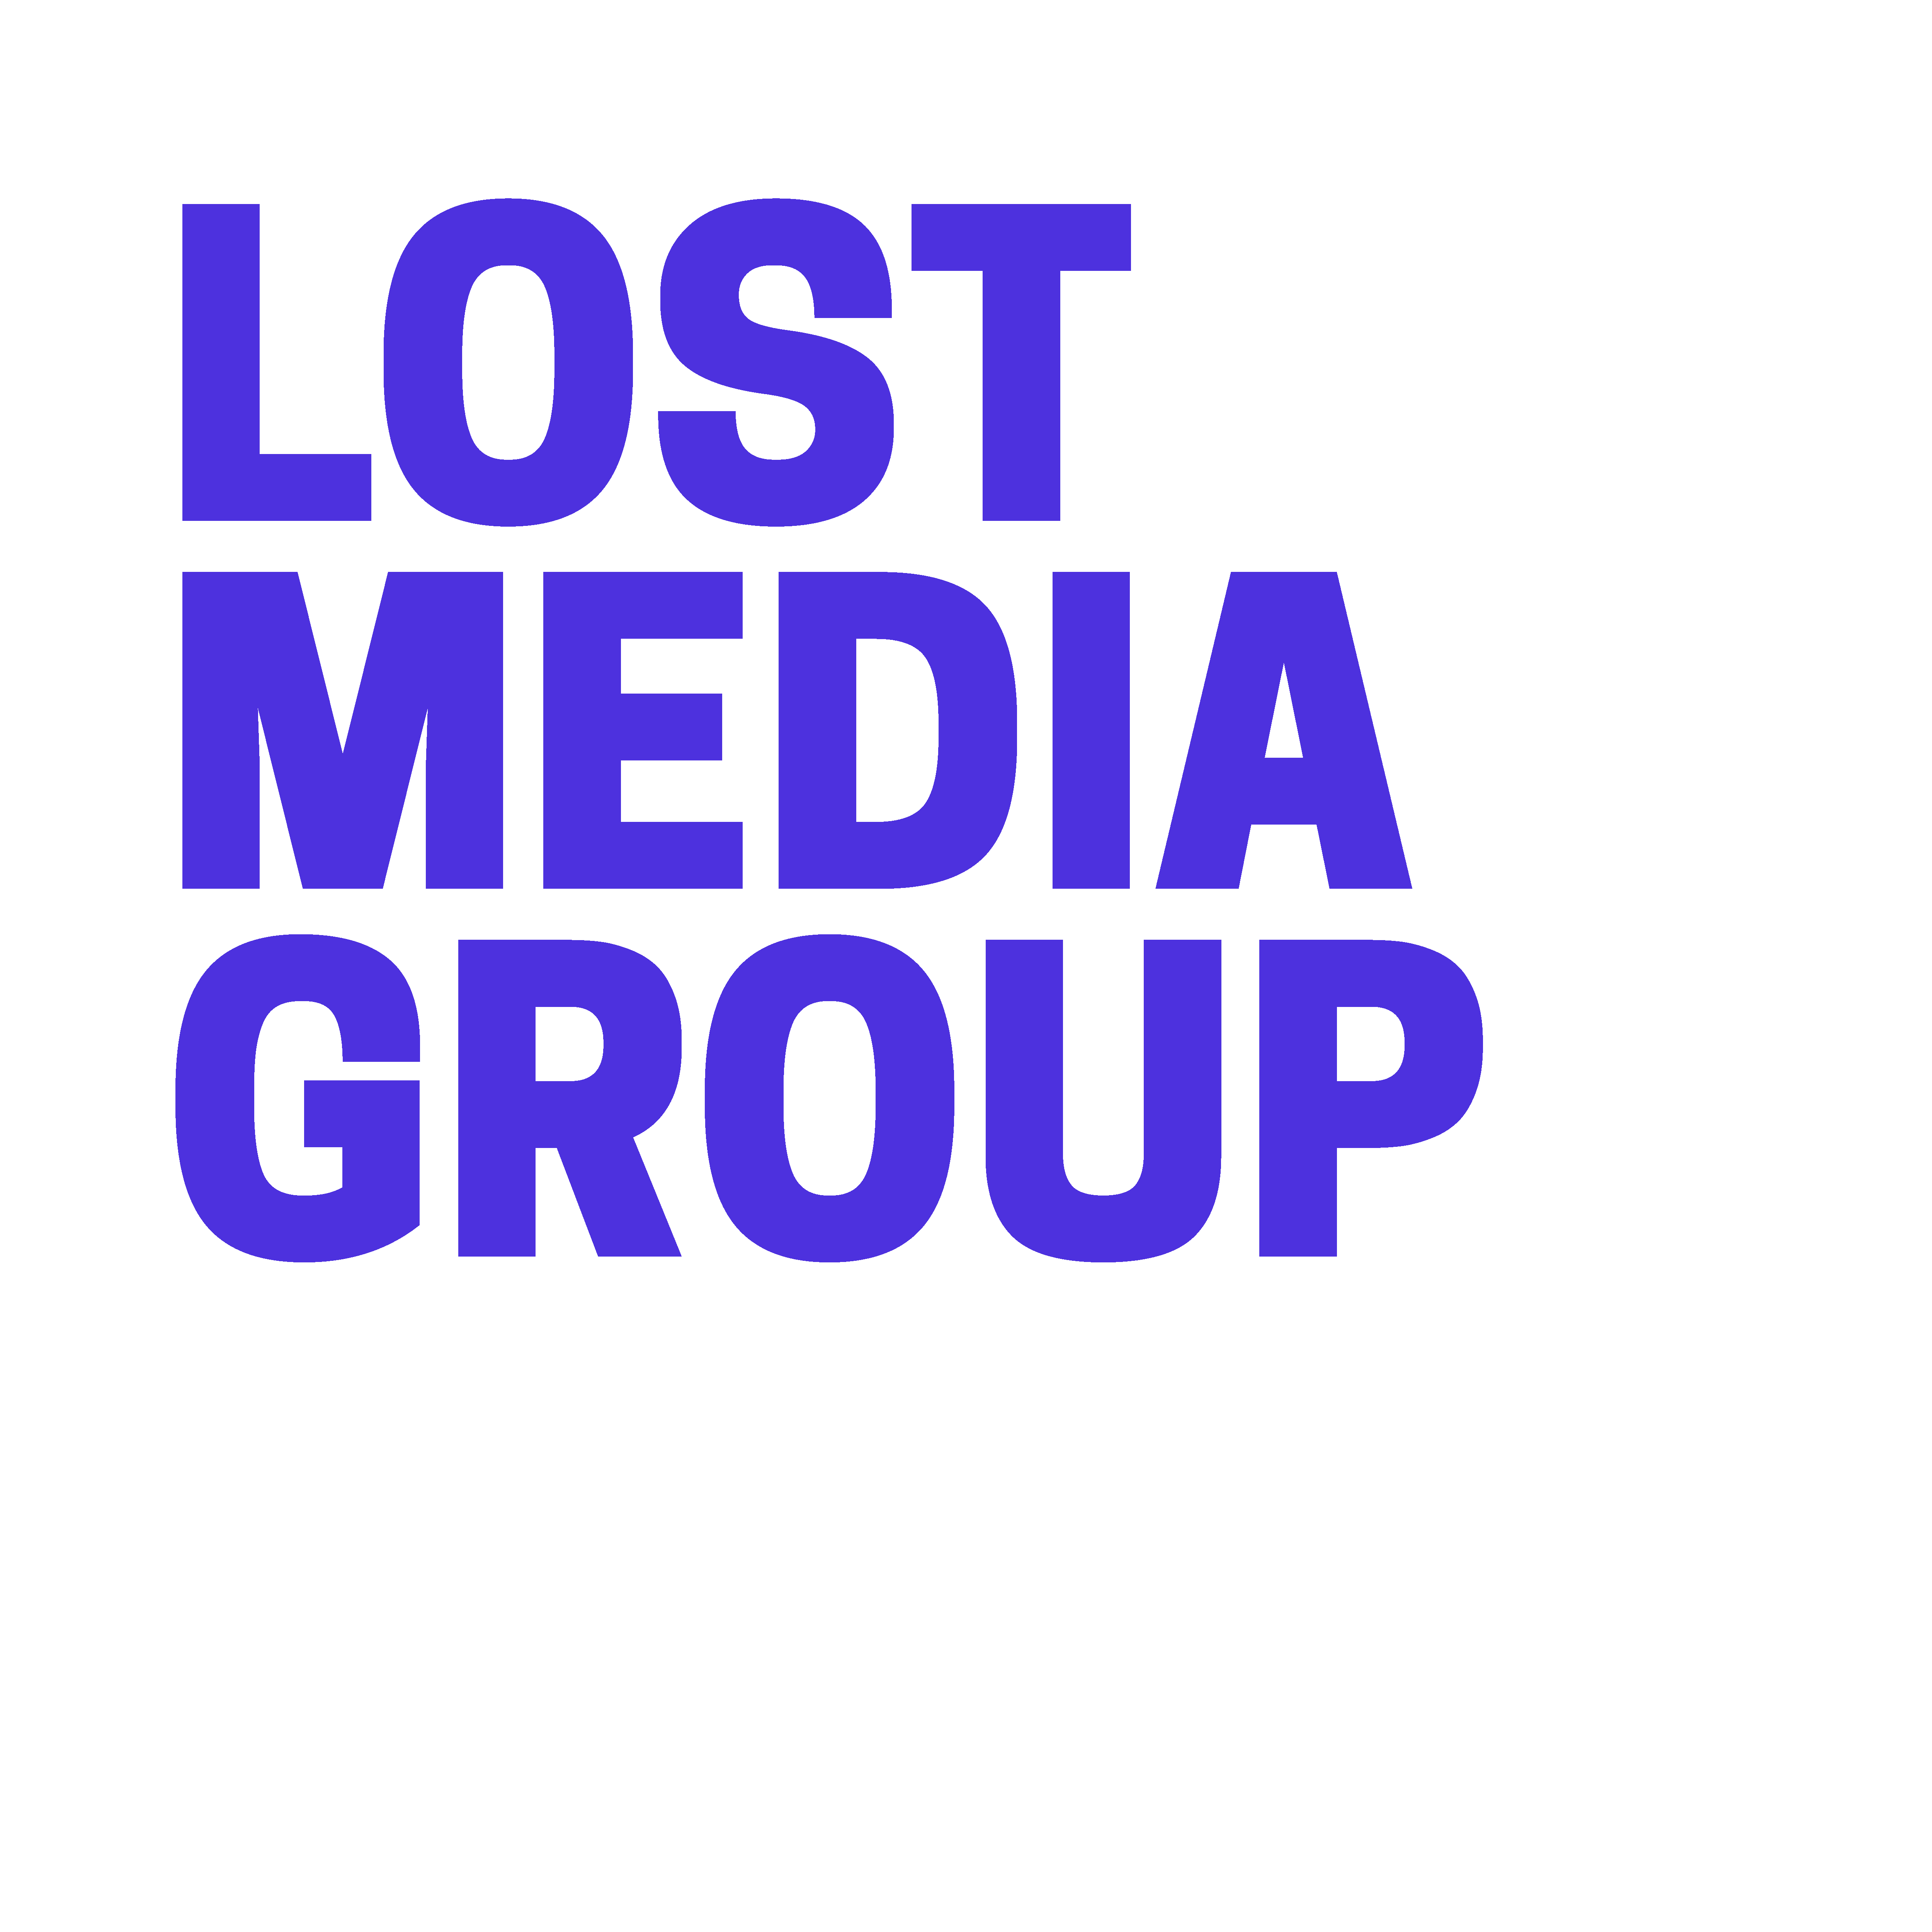 Lost Media Group